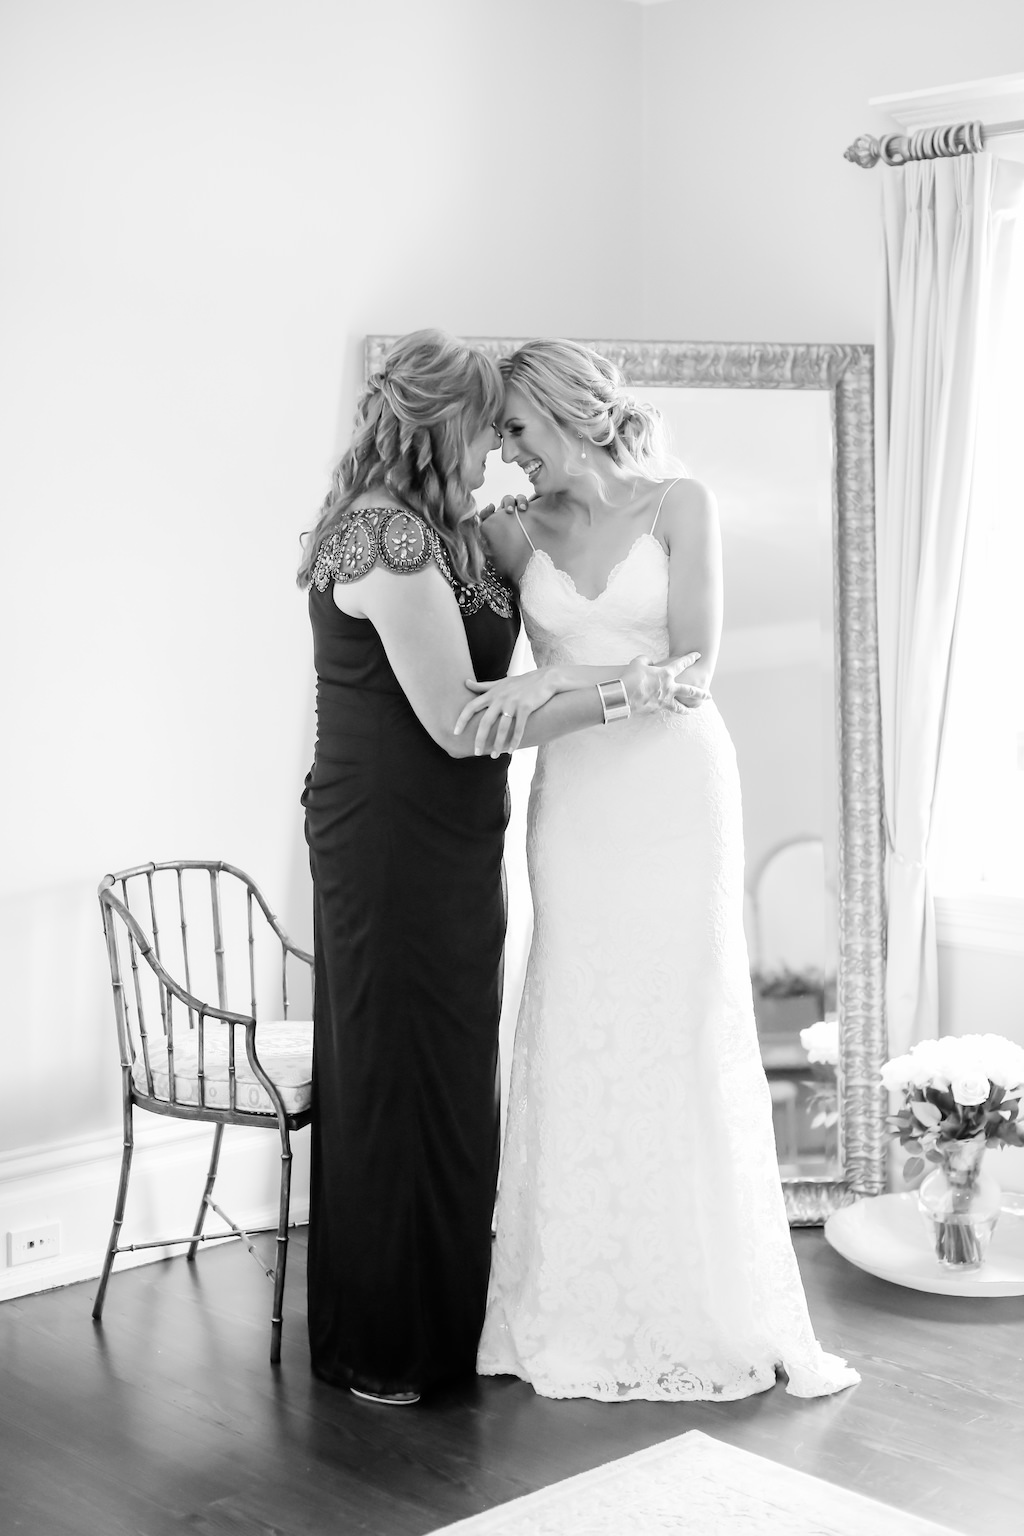 Bride and Mother Getting Ready Wedding Portrait, Bride in Fitted Lace V neckline with Spaghetti Straps Katie May Wedding Dress | Tampa Bay Wedding Photographer Lifelong Photography Studio